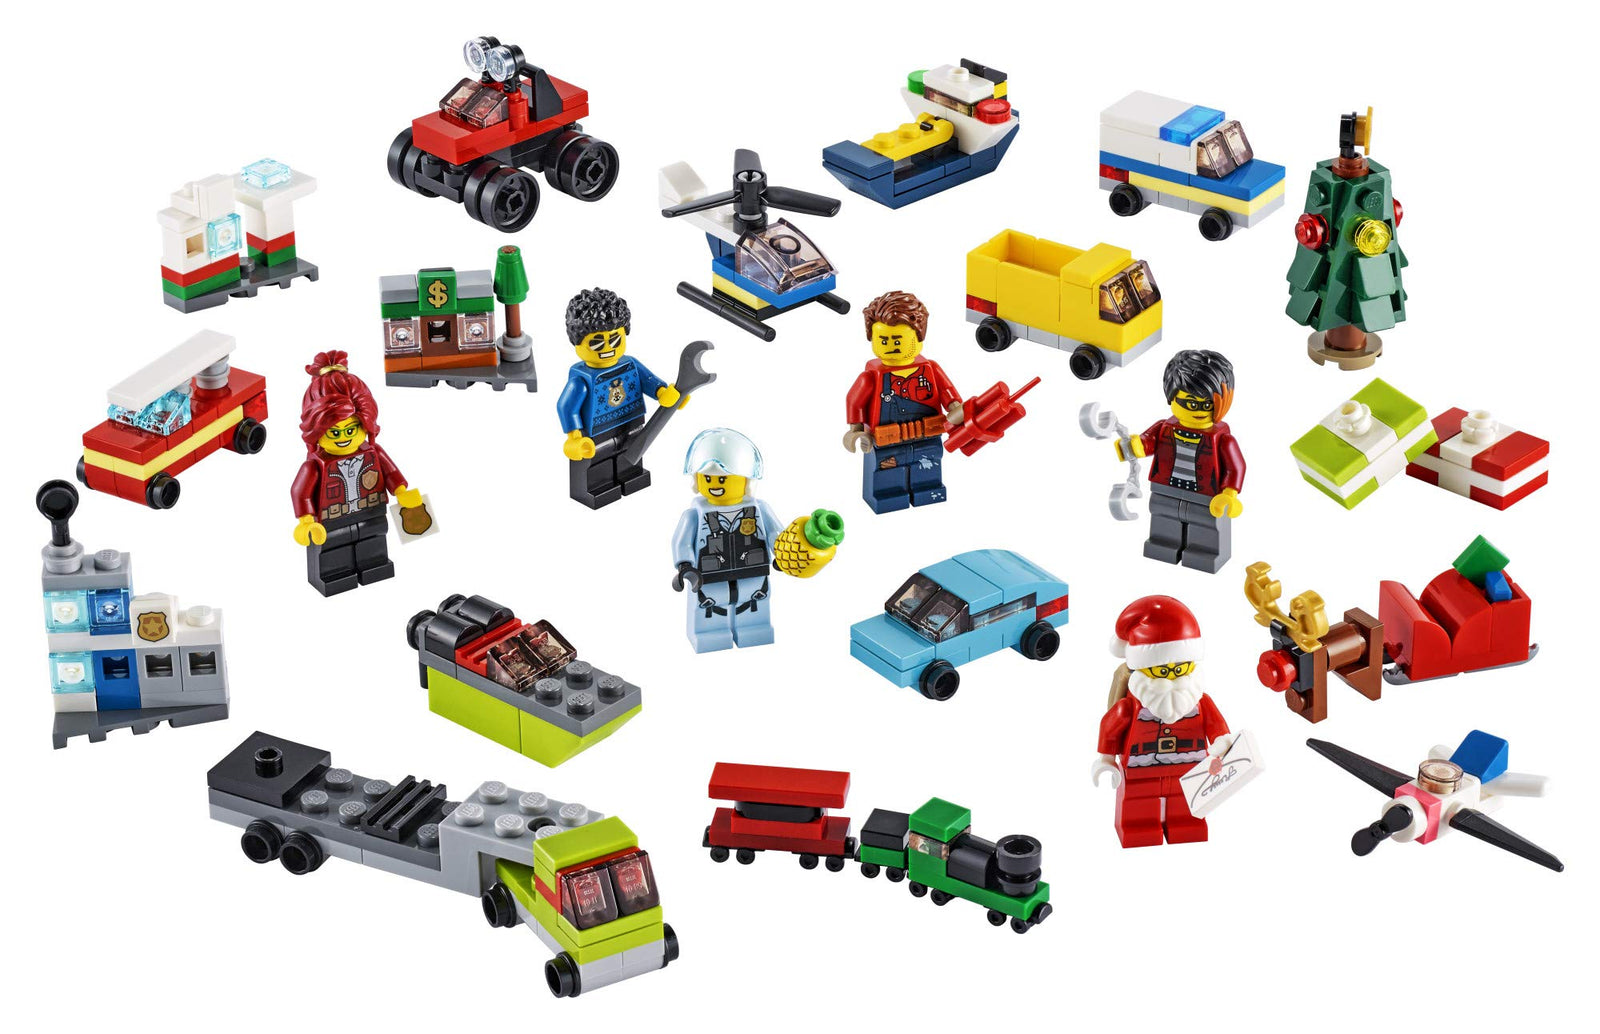 LEGO City 2020 Advent Calendar 60268 Playset, Includes 6 City Adventures TV Series Characters, Miniature Builds, City Play Mat, and Many More Fun and Festive Features (342 Pieces)